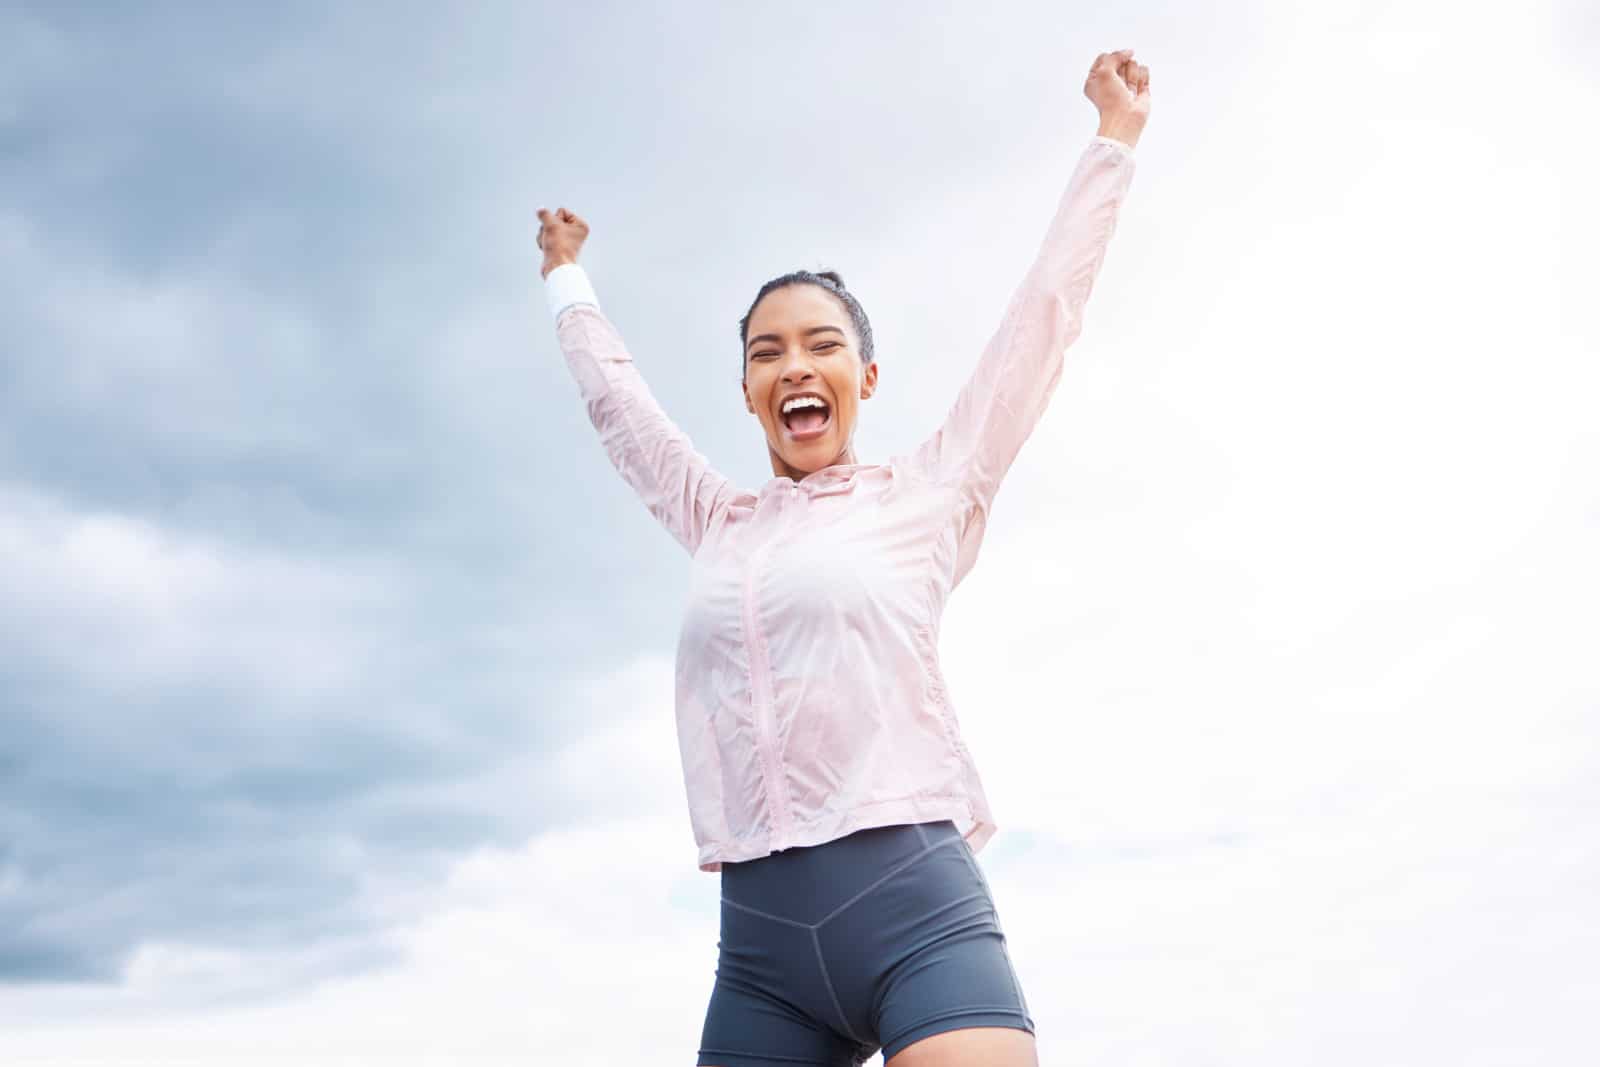 fit woman celebrating victory and goal achievement